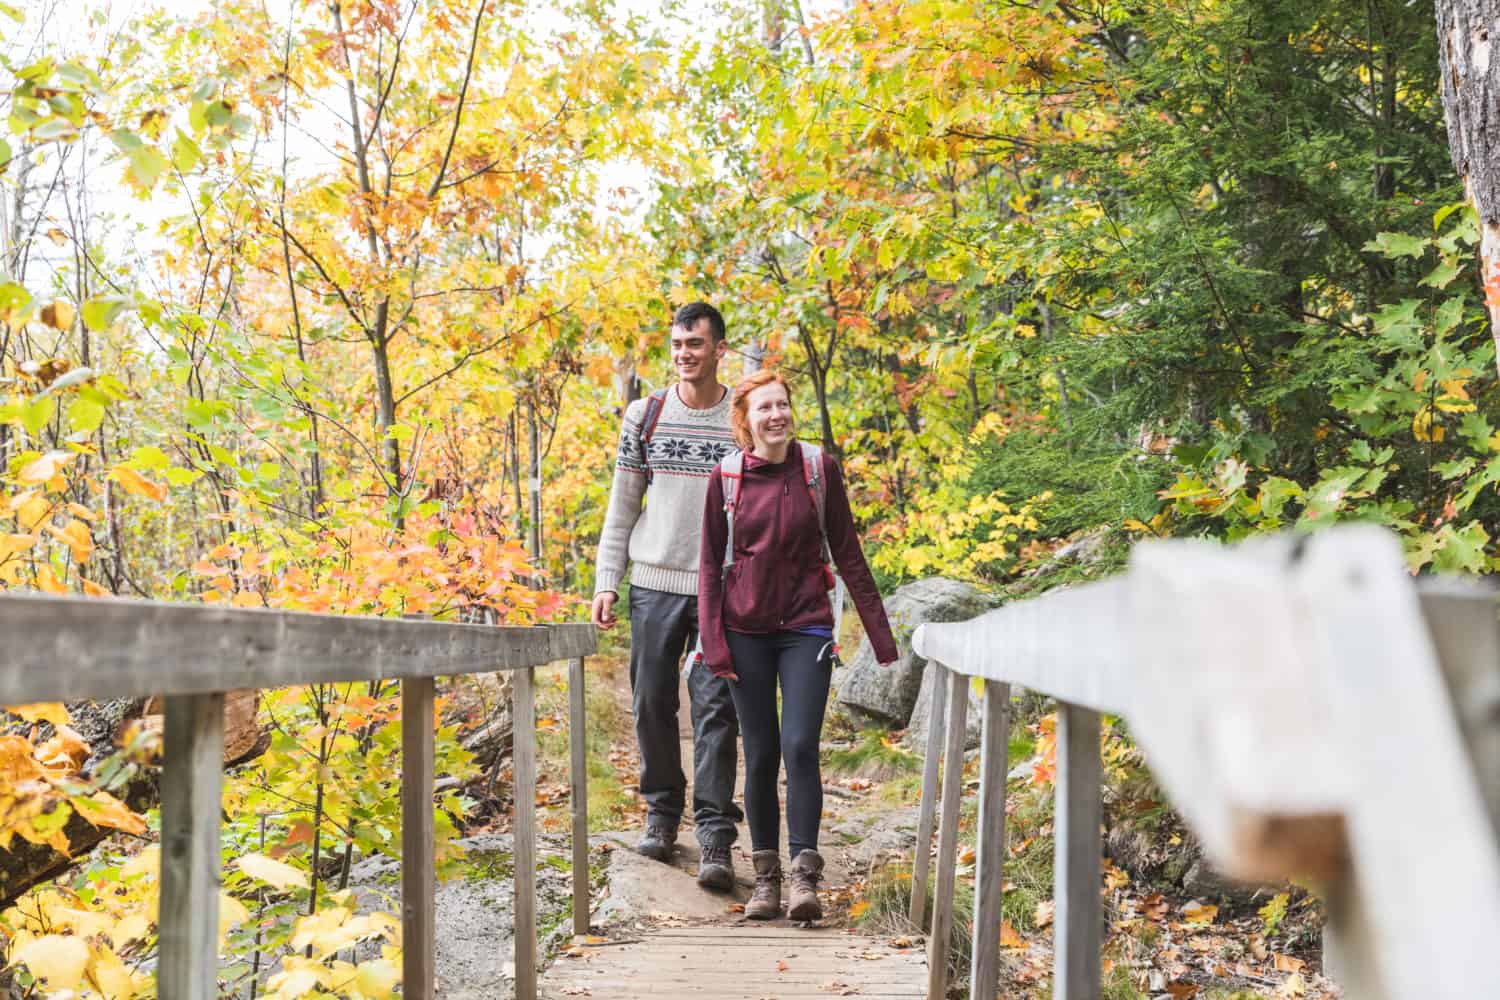 Two happy young people walking over a wooden bridge, with colourful trees all around during the fall season. Autumn and nature concepts.